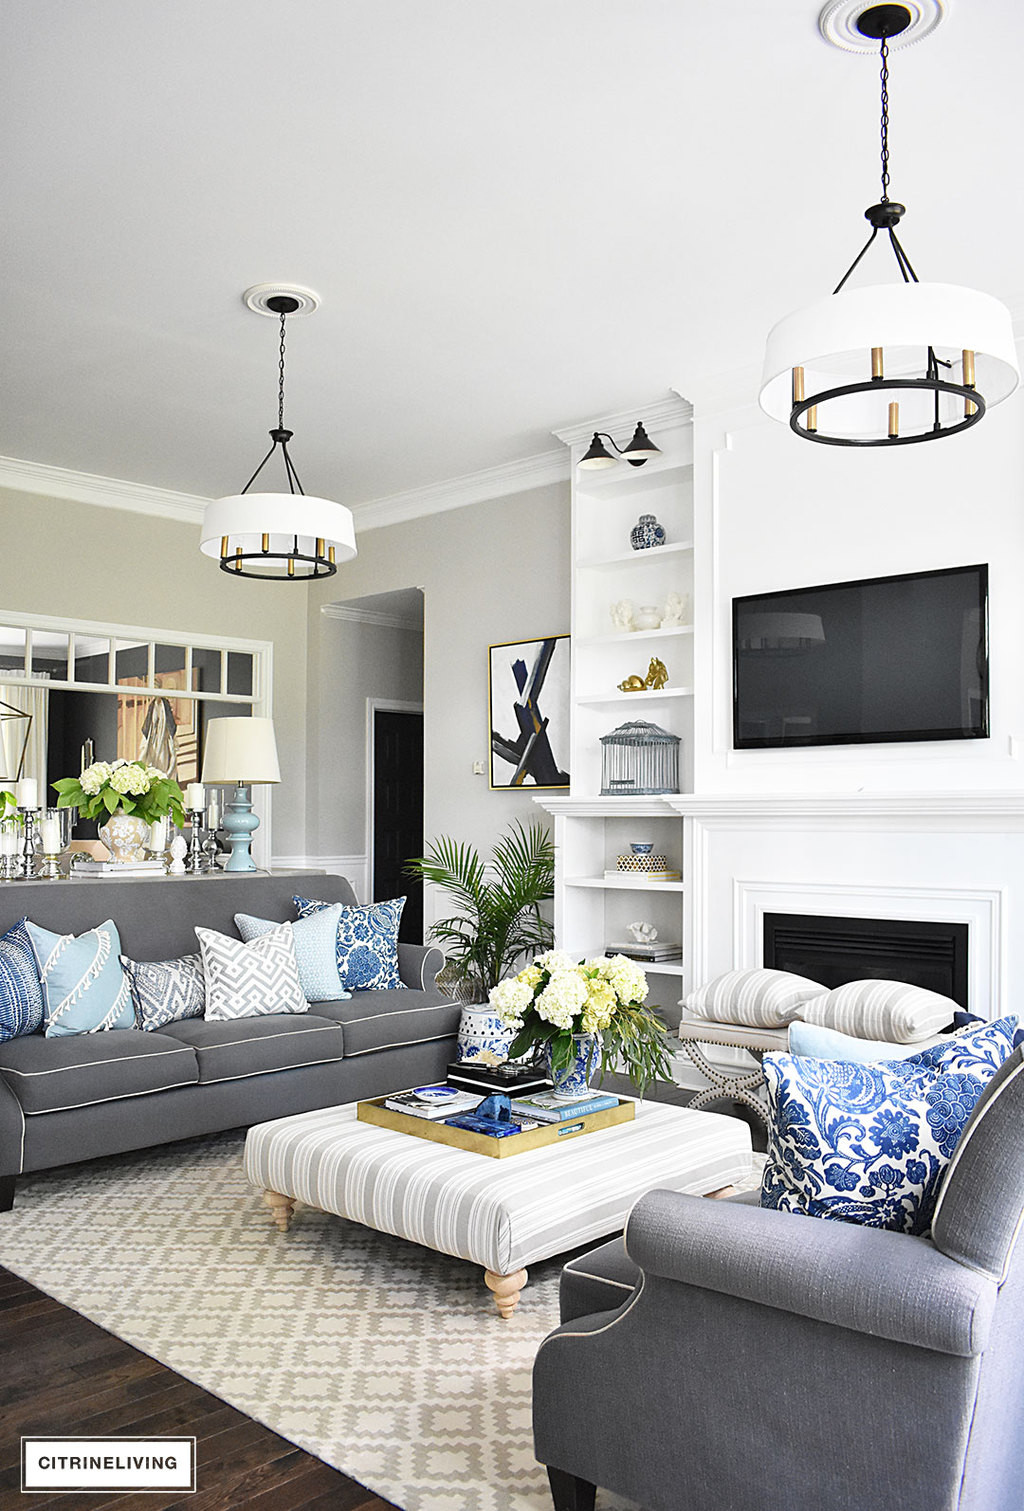 Blue Living Room Decor
 20 Fresh Ideas for Decorating with Blue and White